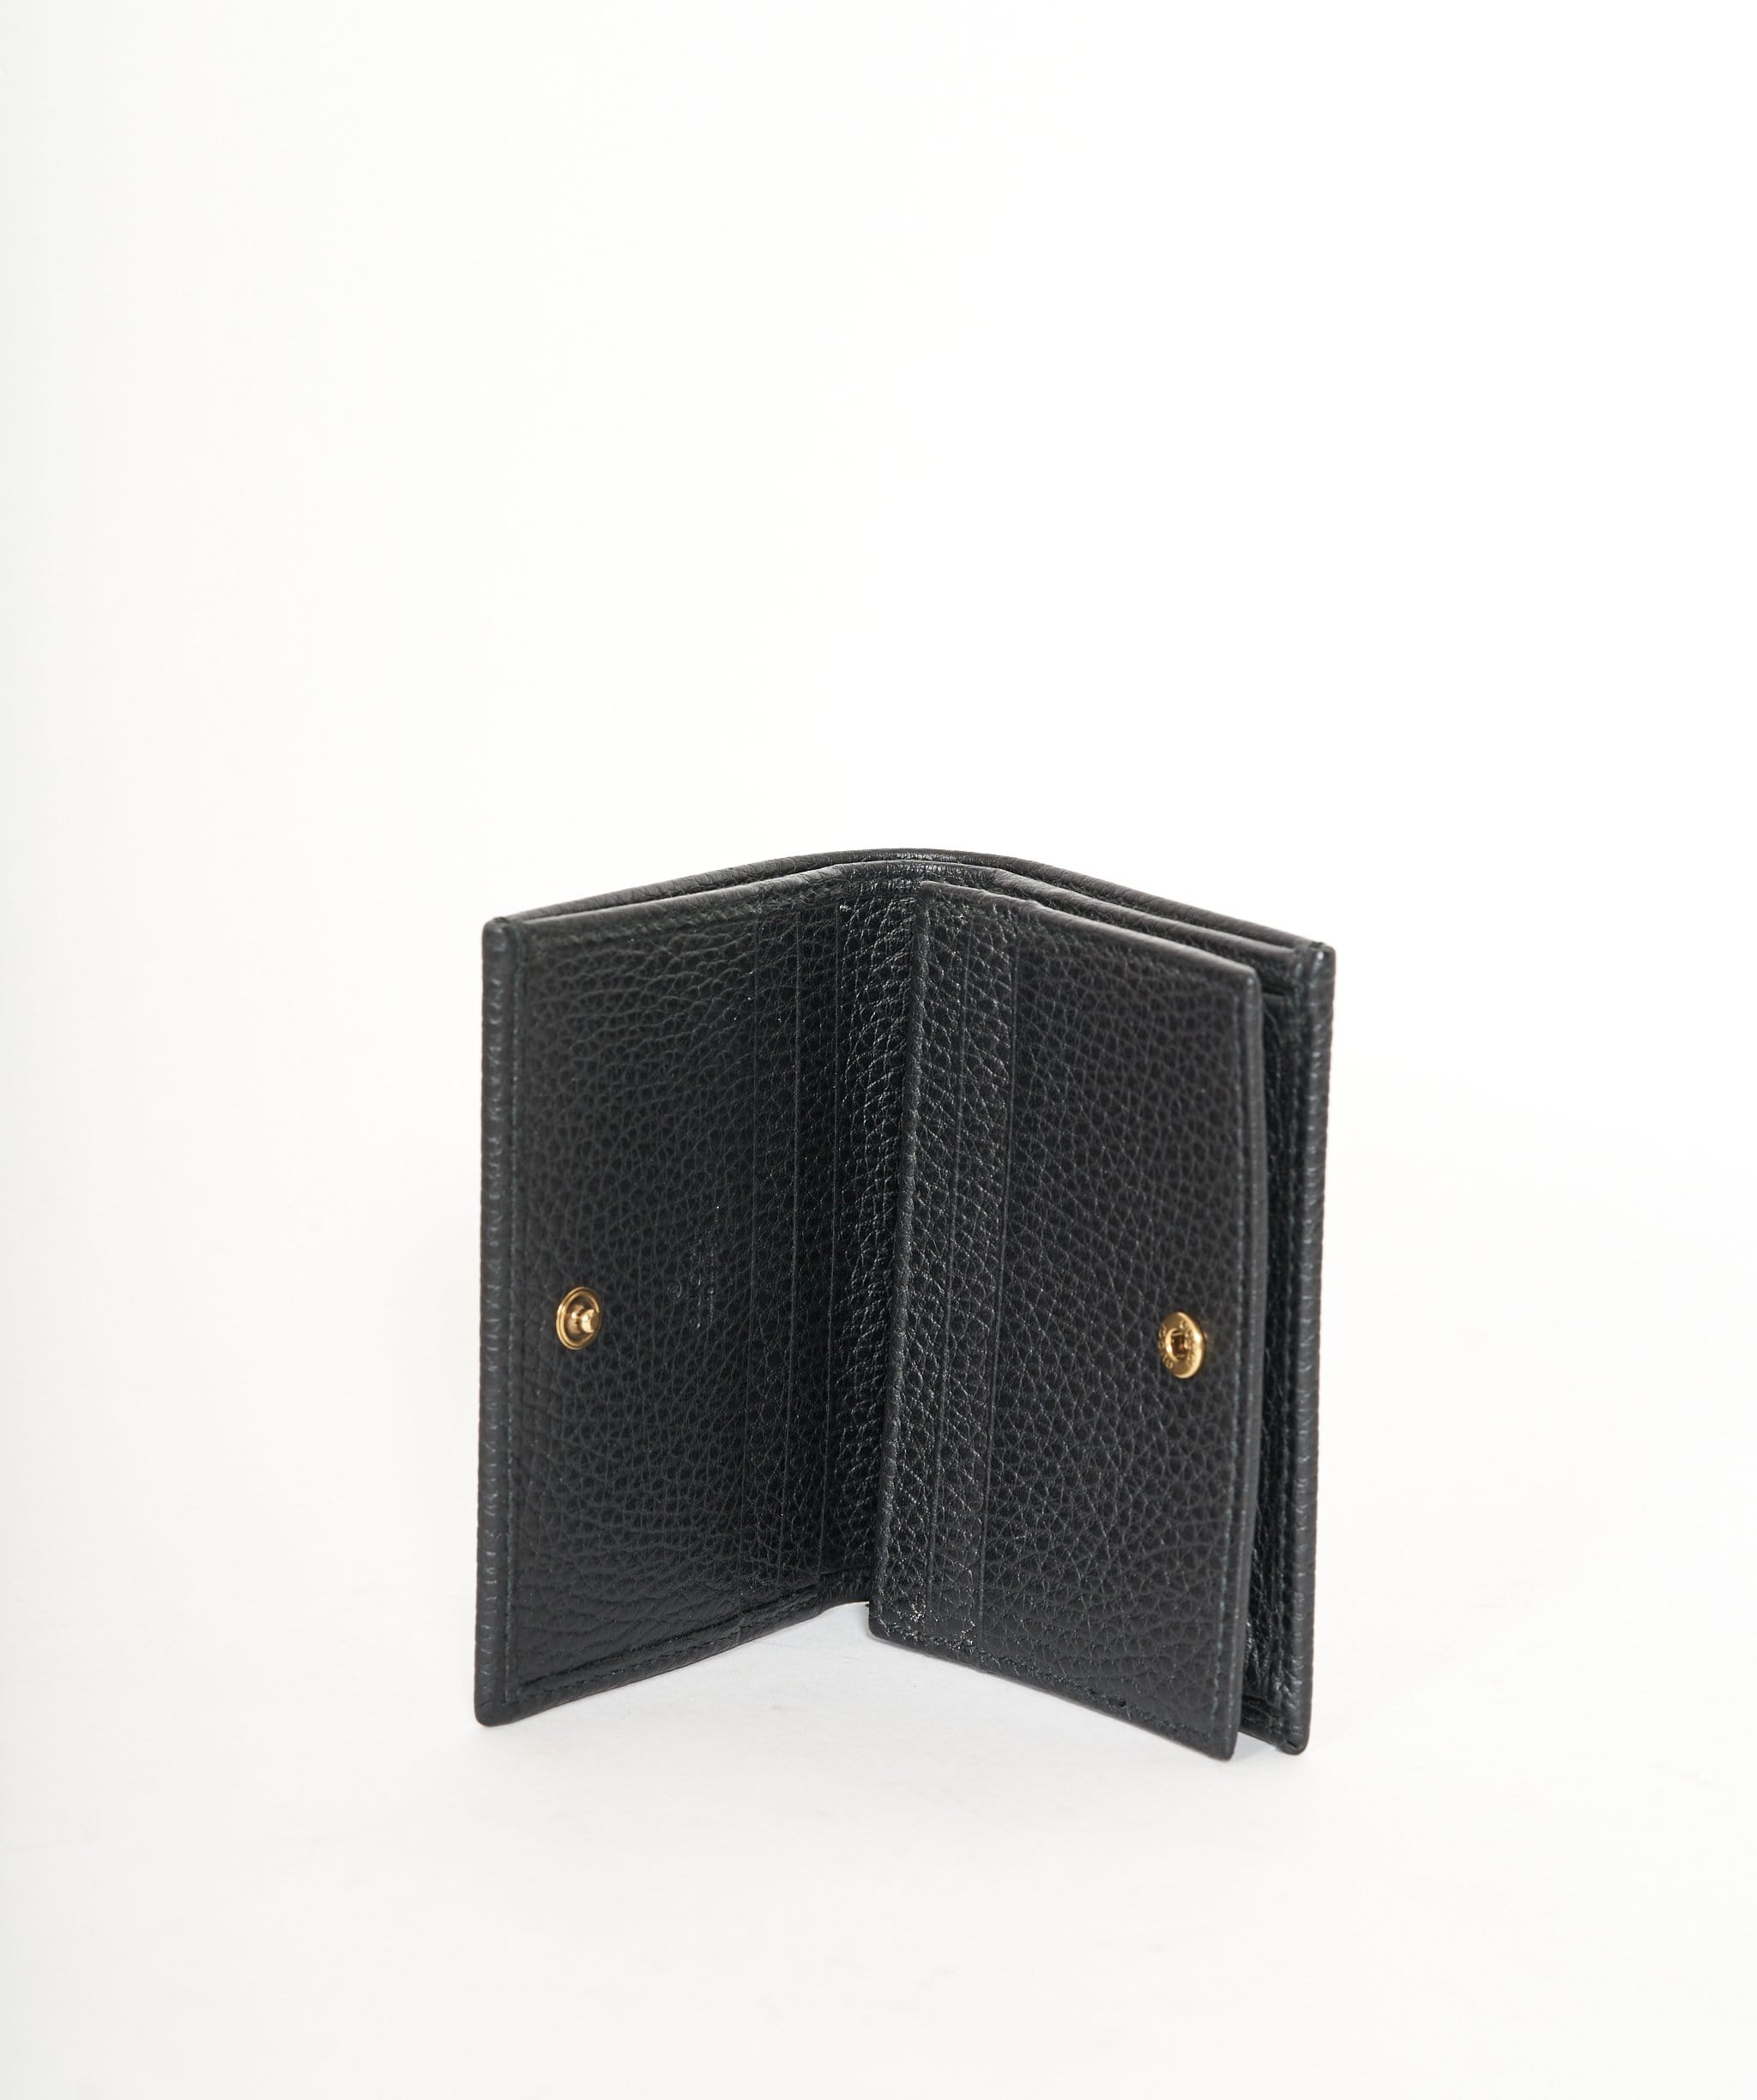 Gucci Gucci Black wallet with butterfly